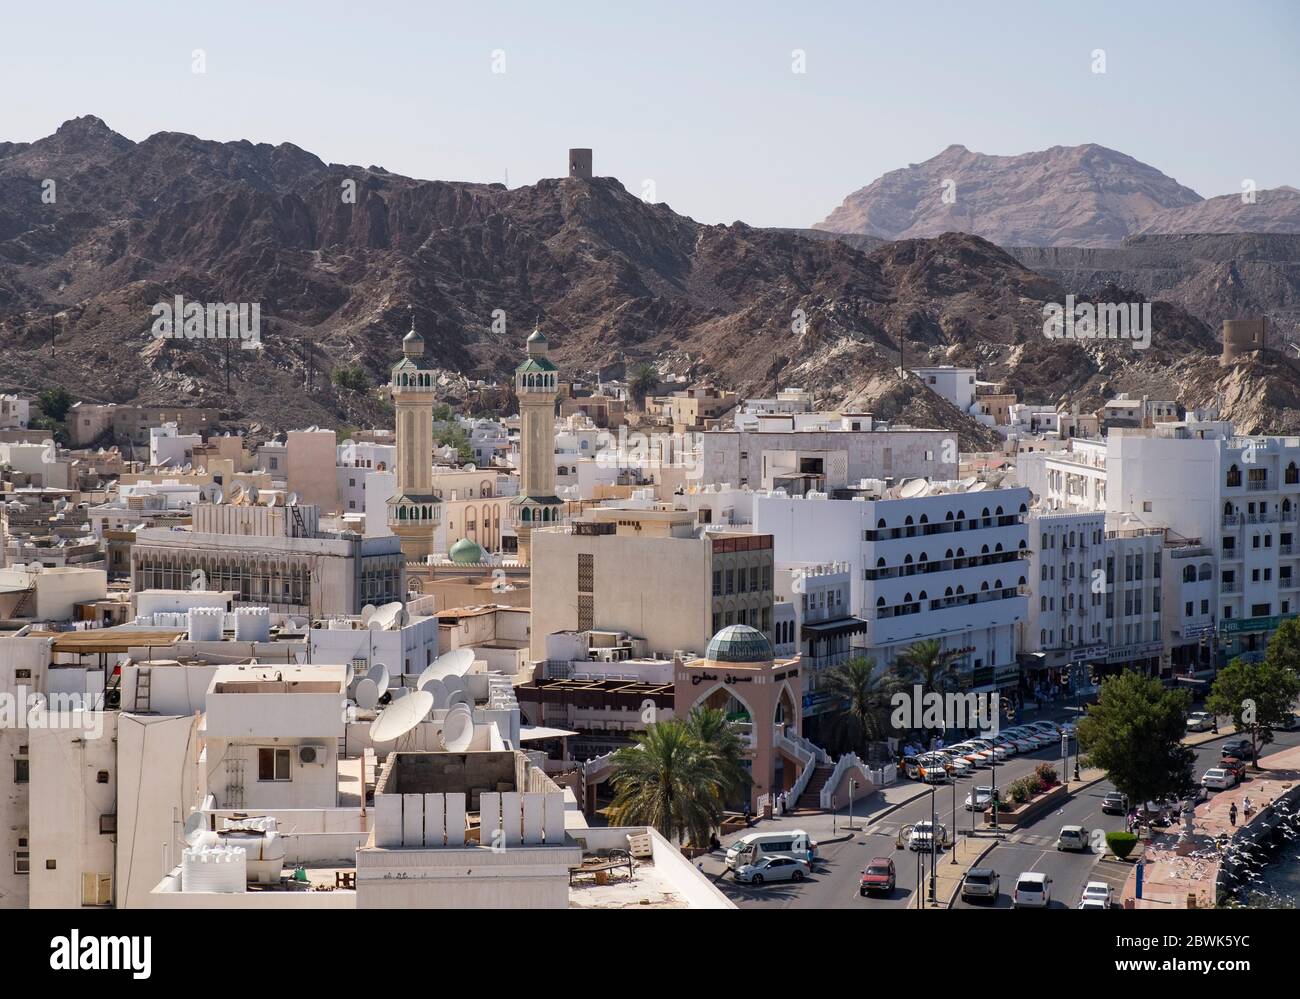 Elevated view of the Corniche entrance to the Mutrah Souq in Al Bahri Road, Muscat, Sultanate of Oman. Stock Photo